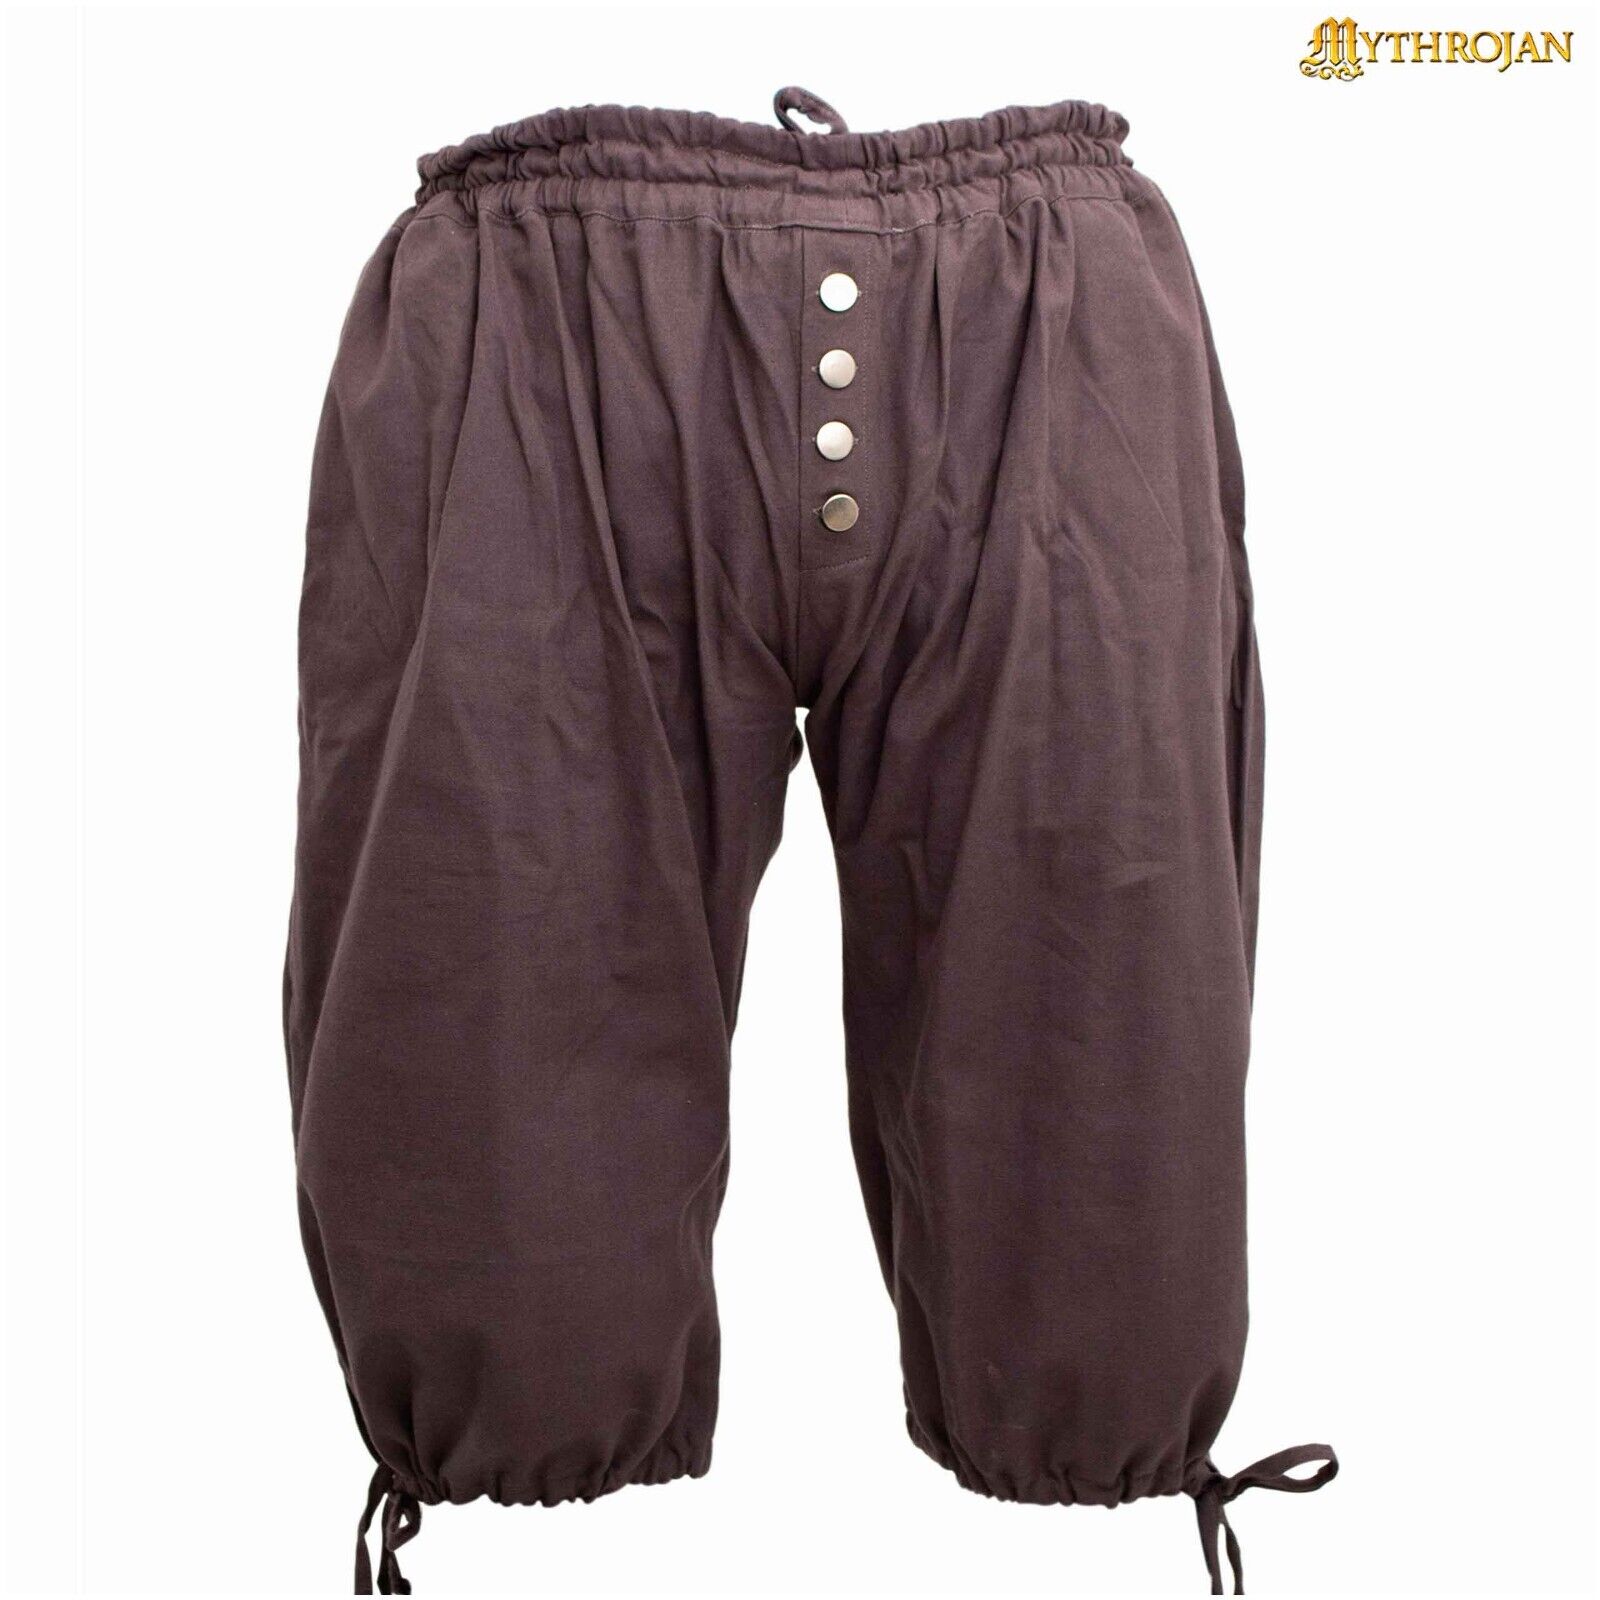 Pirate Cotton Breeches Adult Colonial Medieval Renaissance Costume for Men Grey